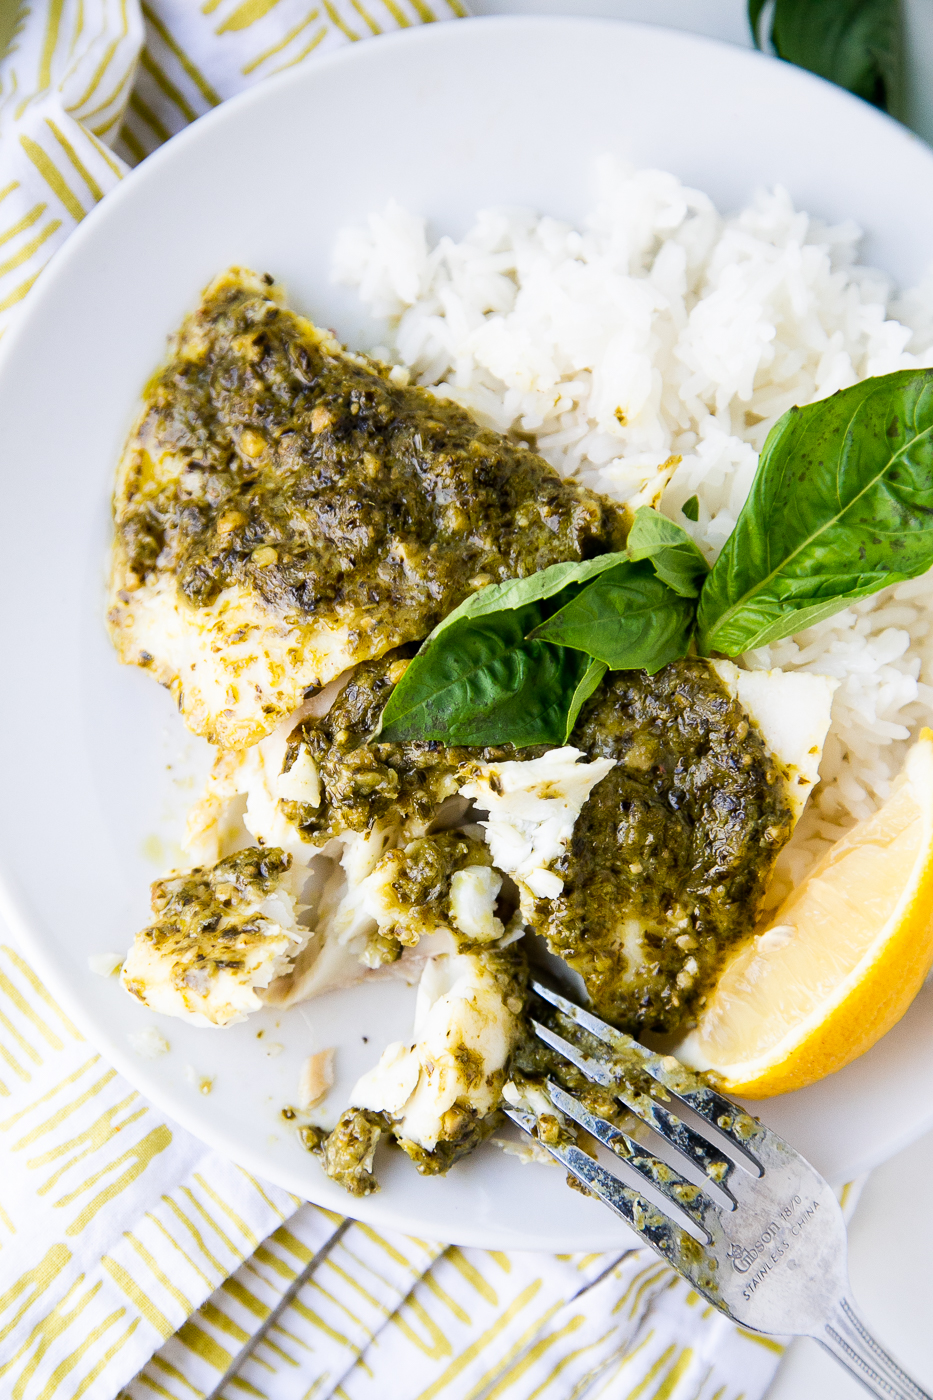 https://www.perrysplate.com/wp-content/uploads/2014/03/Baked-Cod-with-Basil-Pesto-4.jpg